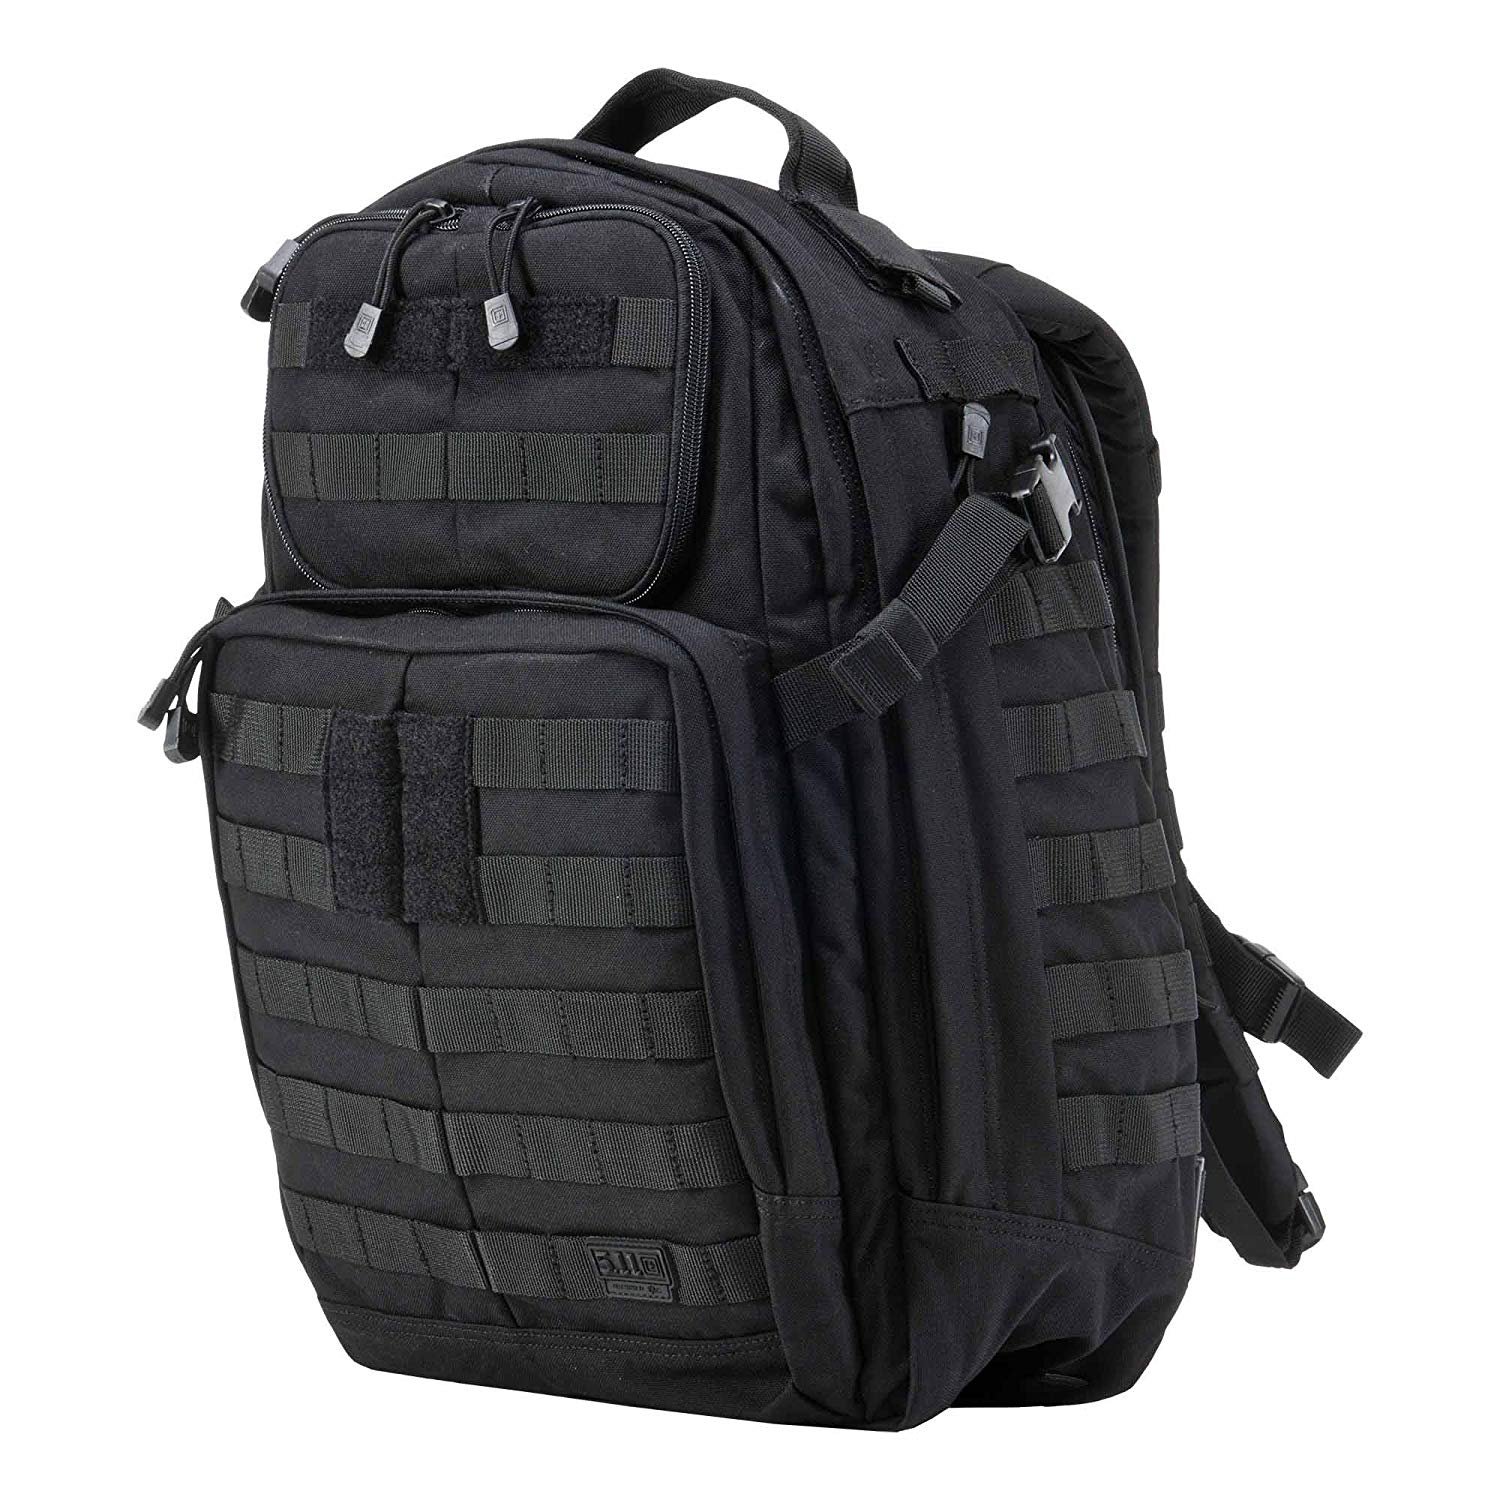 5.11 Rush 24 Military Tactical Backpack, Black - image 2 of 8